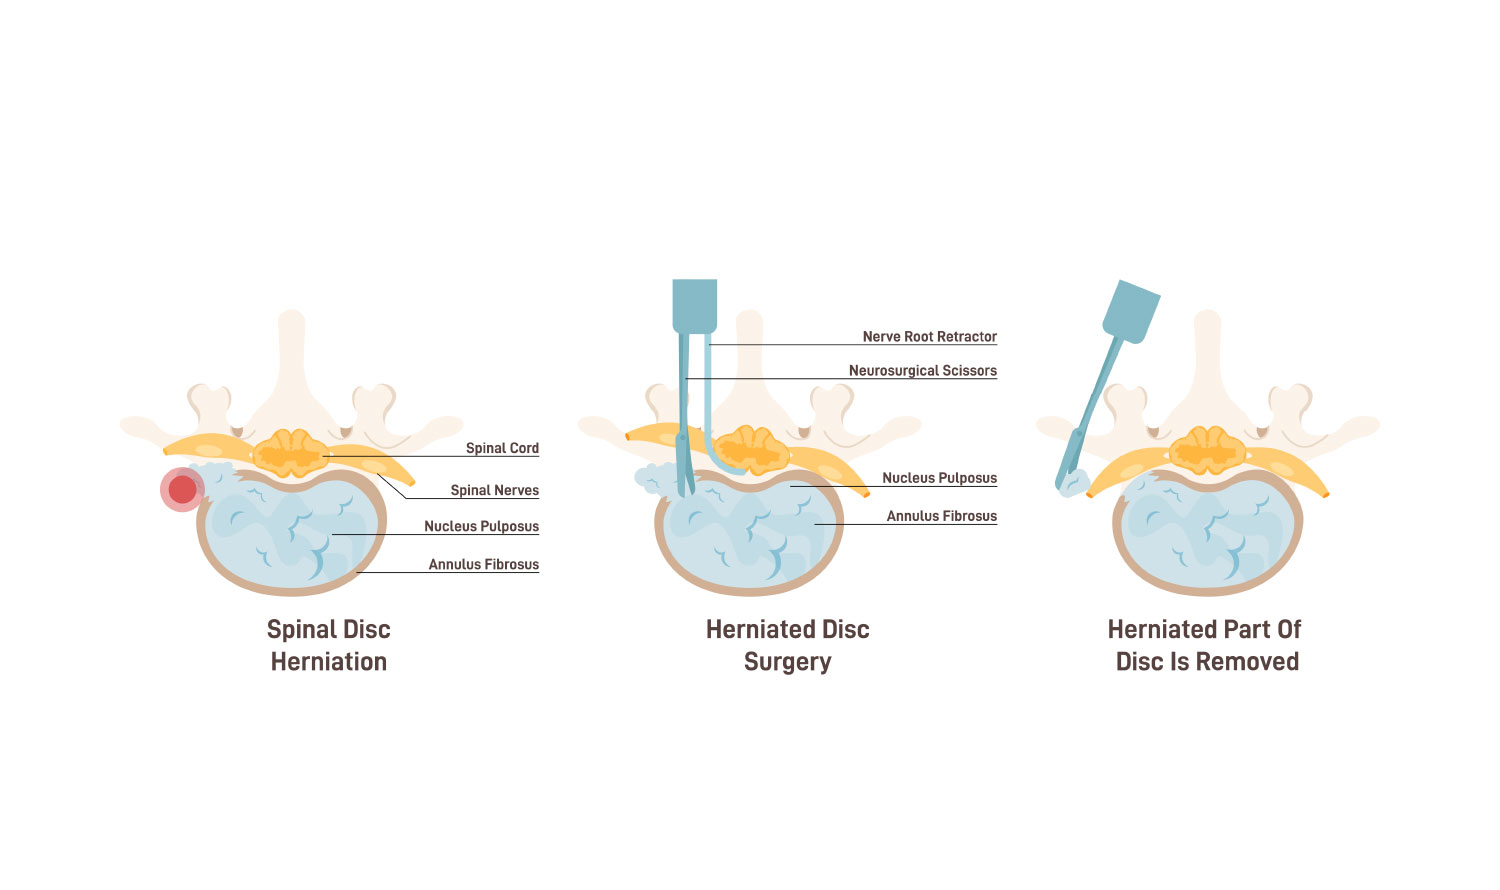 A schematic representation delineating the phases of herniated disc surgery.